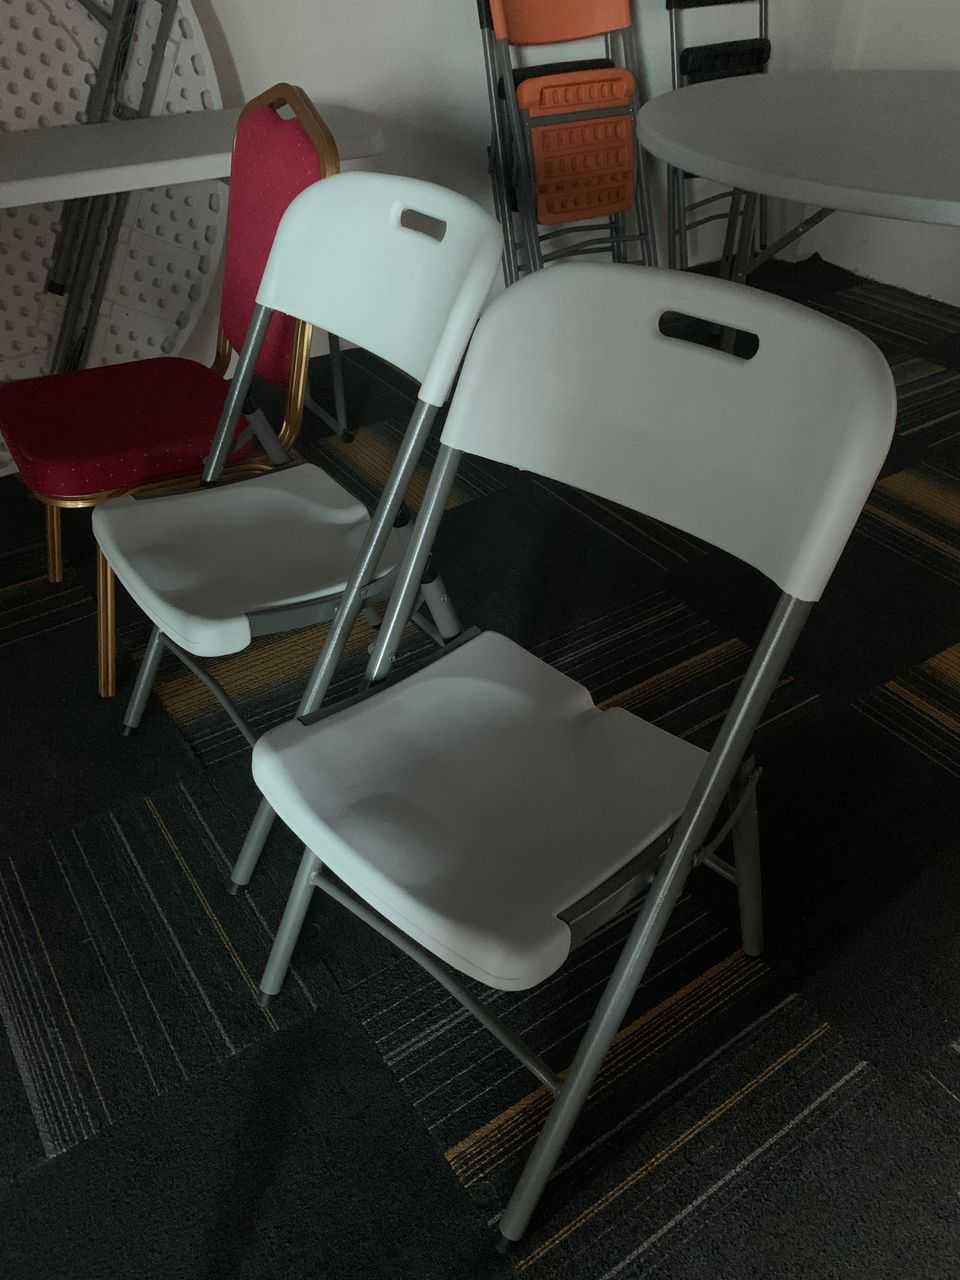 Foldable White Chairs